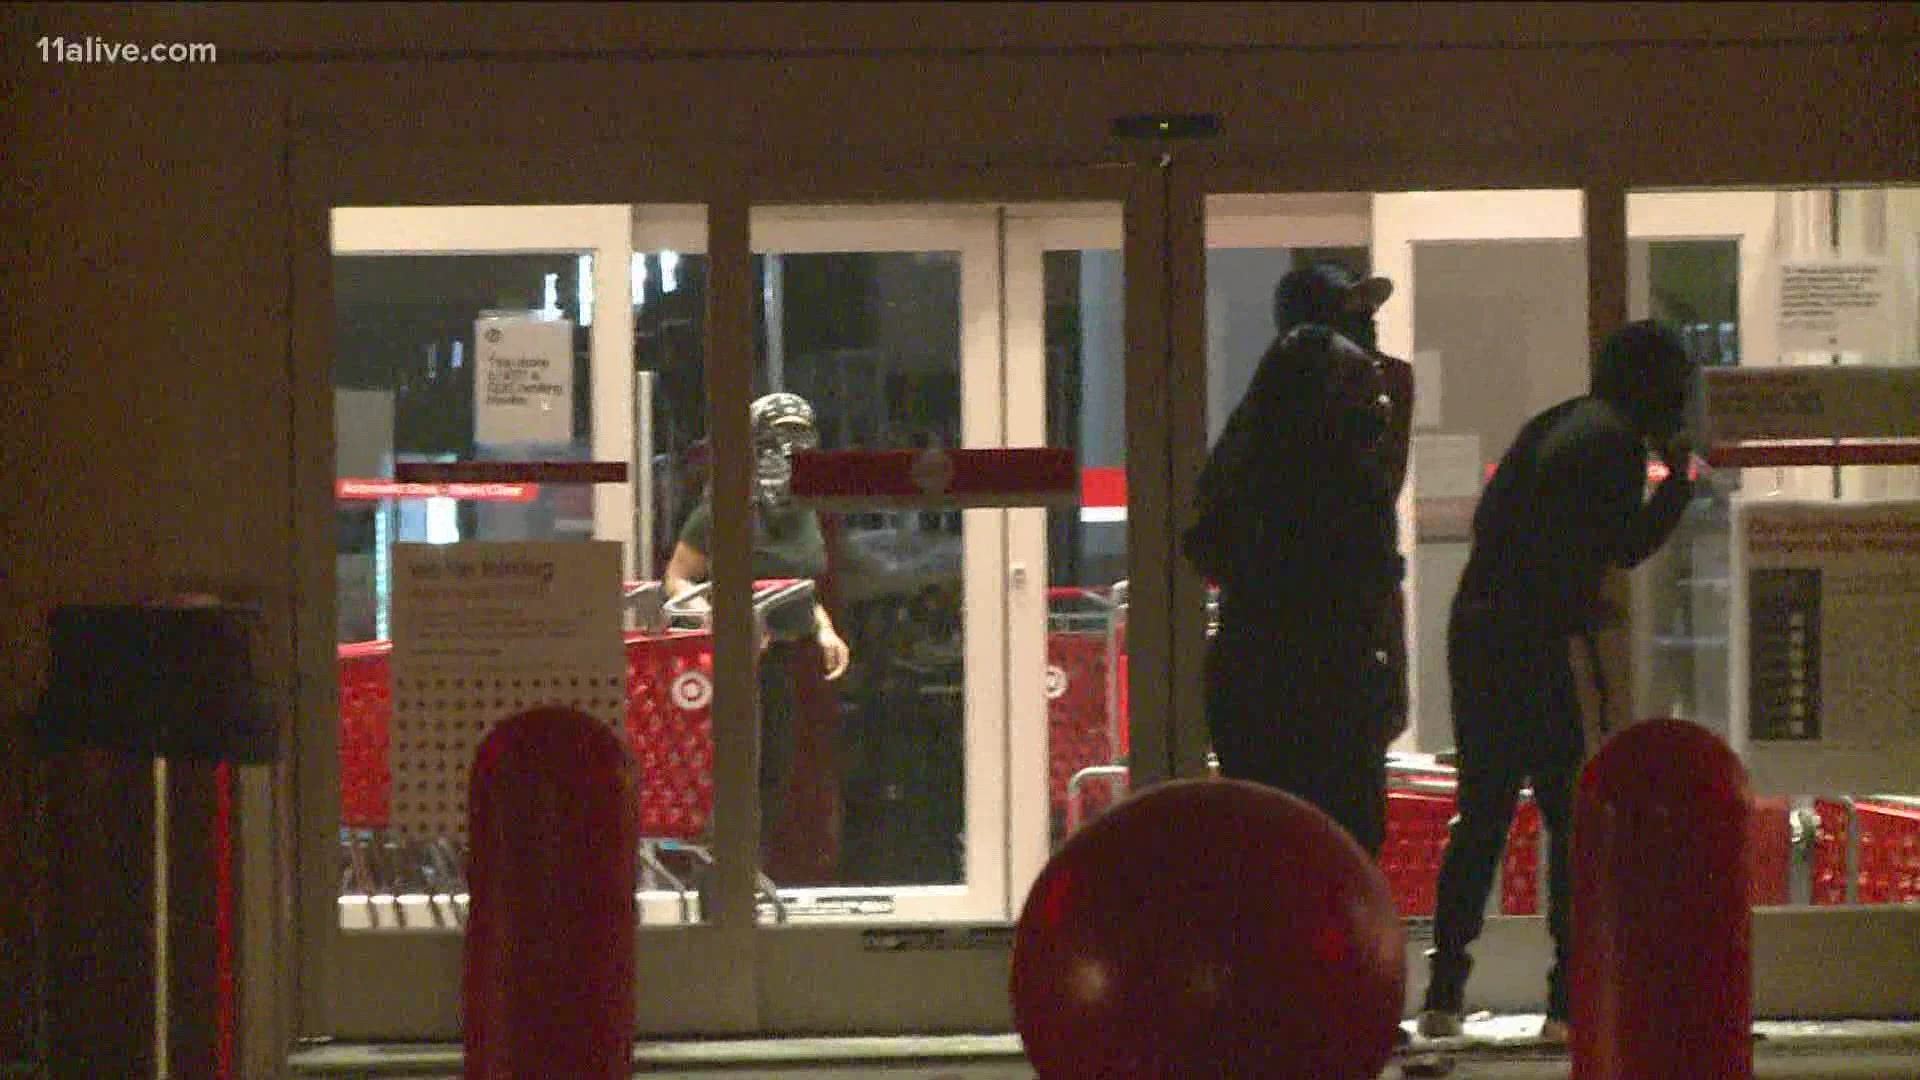 11Alive saw people entering in and taking from the Target on Syndey Marcus in Buckhead.